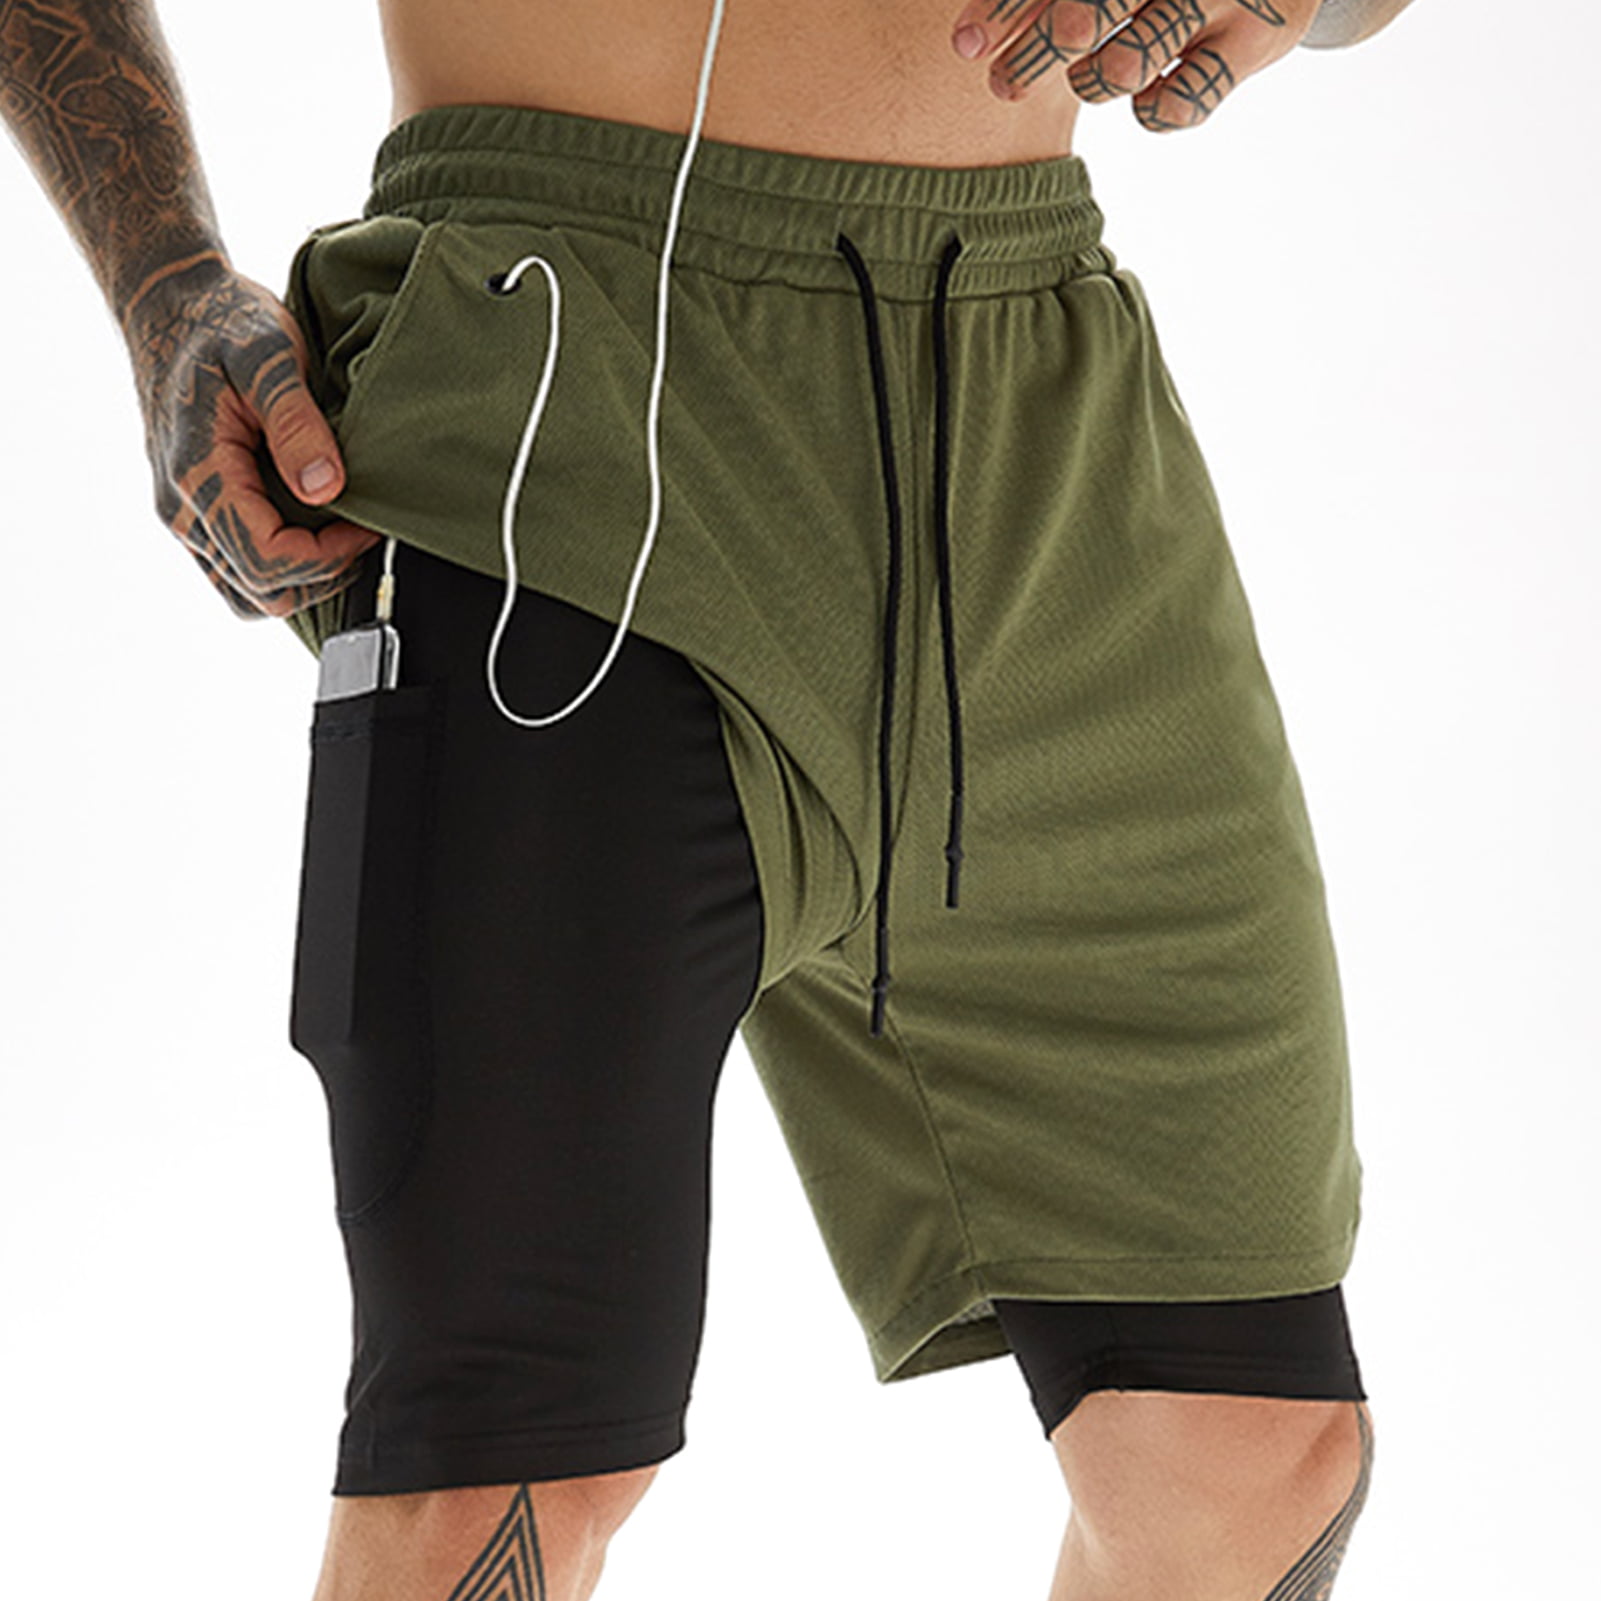 Men Running Shorts 2 in 1 Pocket Fitness Workout Sports Short Pants 8colors 